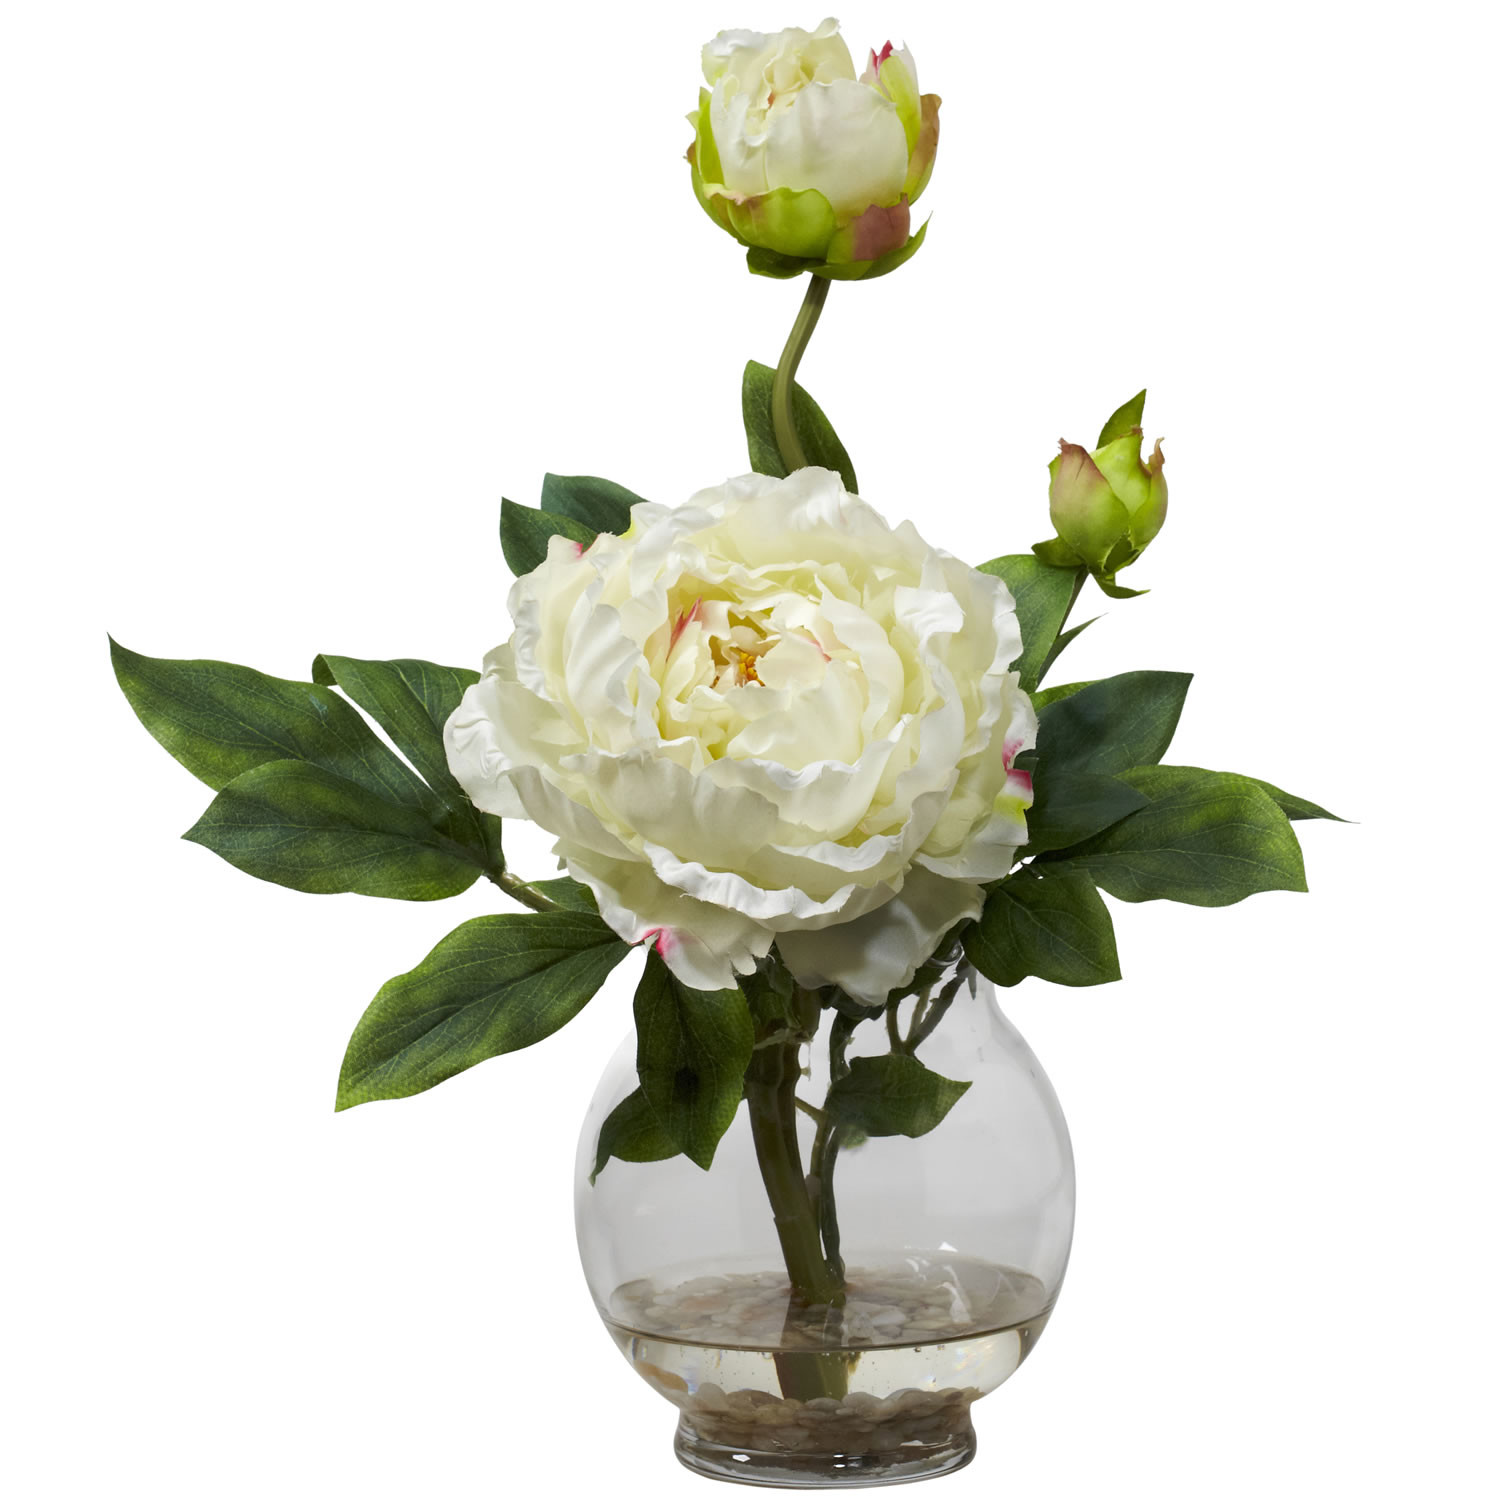 27 Best Cube Vase Centerpieces 2022 free download cube vase centerpieces of small vase flower centerpieces flowers healthy throughout white peony flower centerpiece